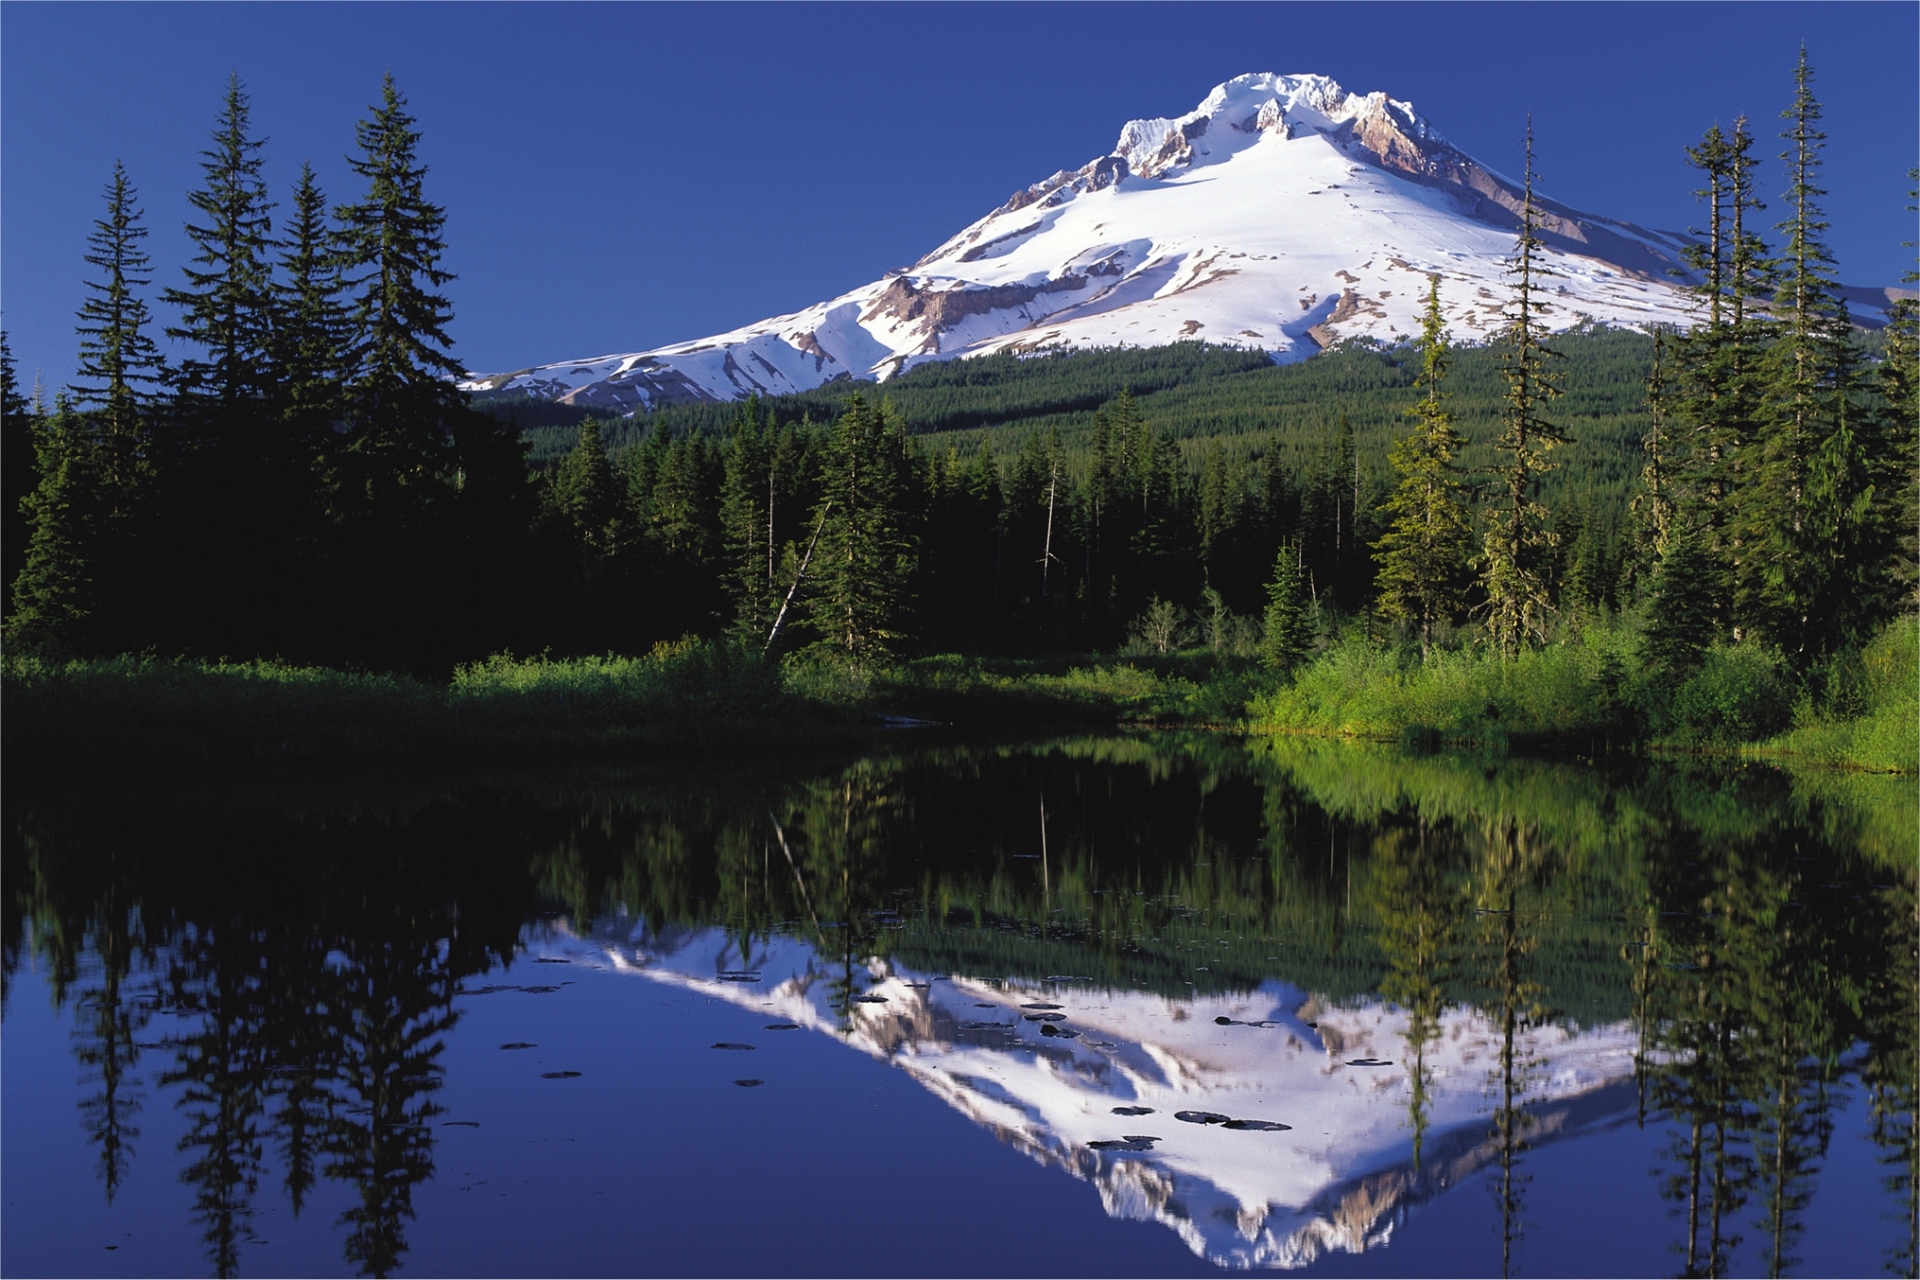 Mt. Hood reflected in a lake